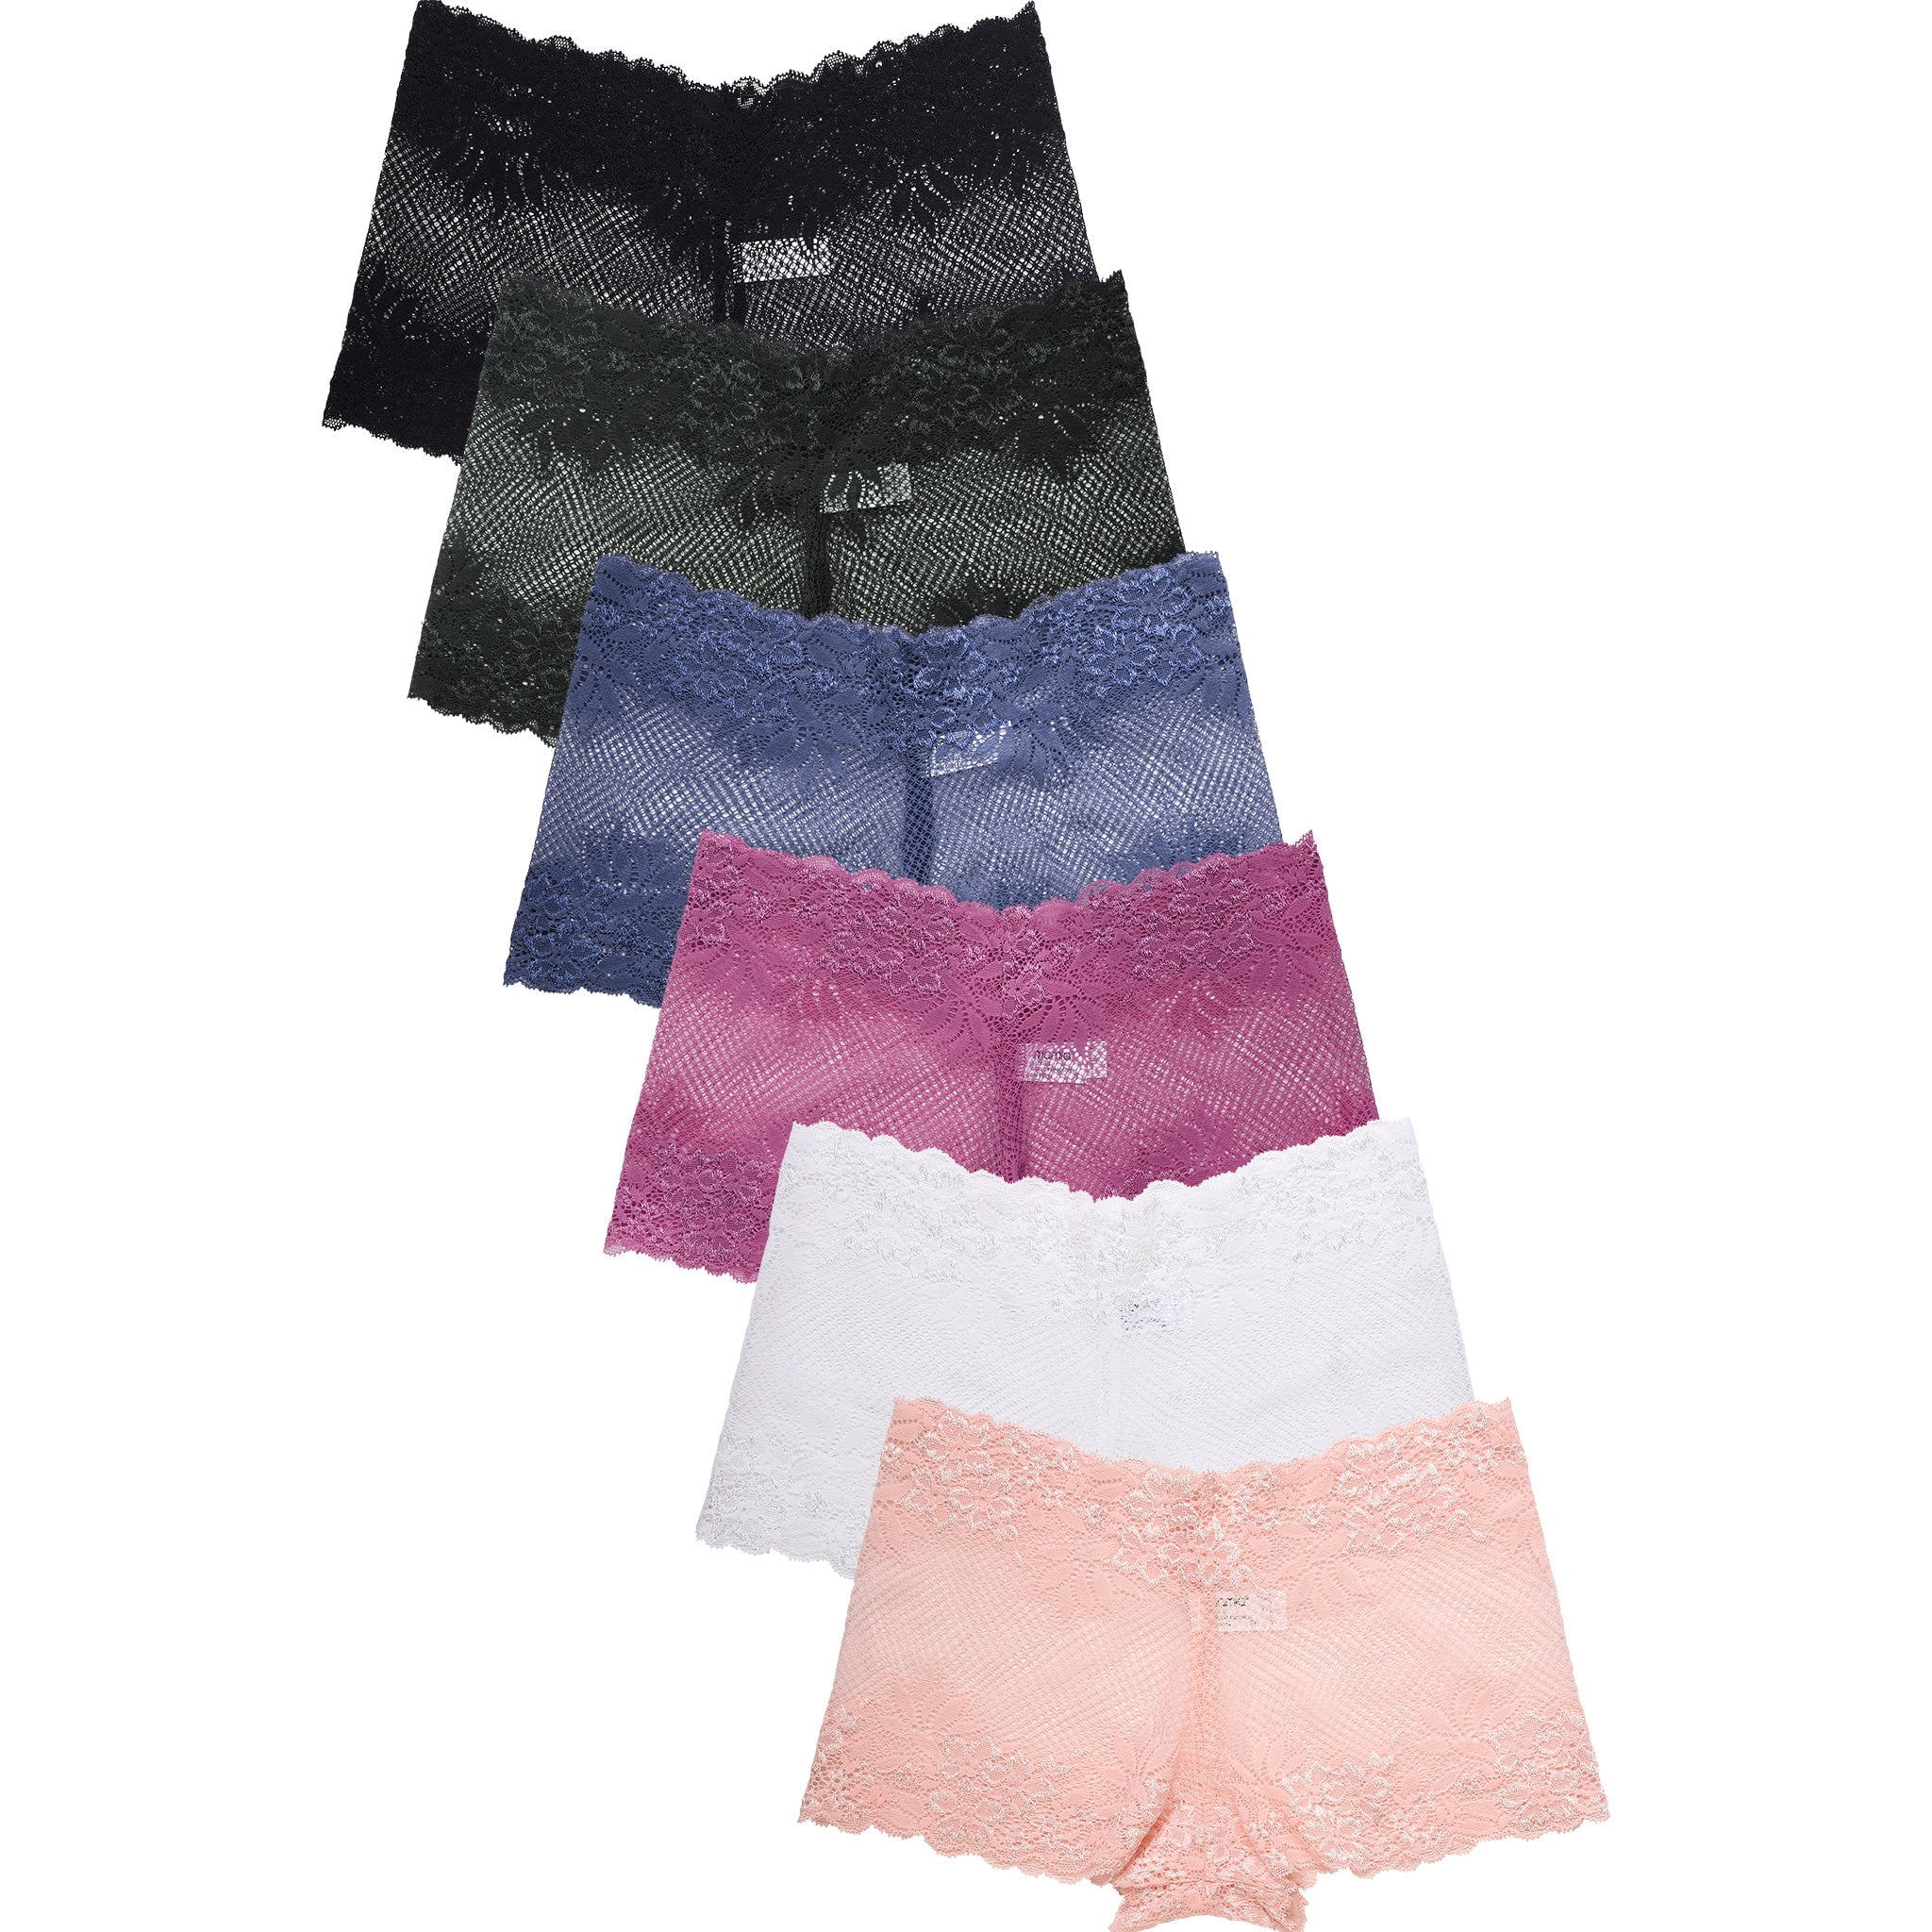 247 Frenzy Women's Essentials PACK OF 6 Cotton Stretch Boyshort Panty  Underwear, L16121, Small : : Clothing, Shoes & Accessories